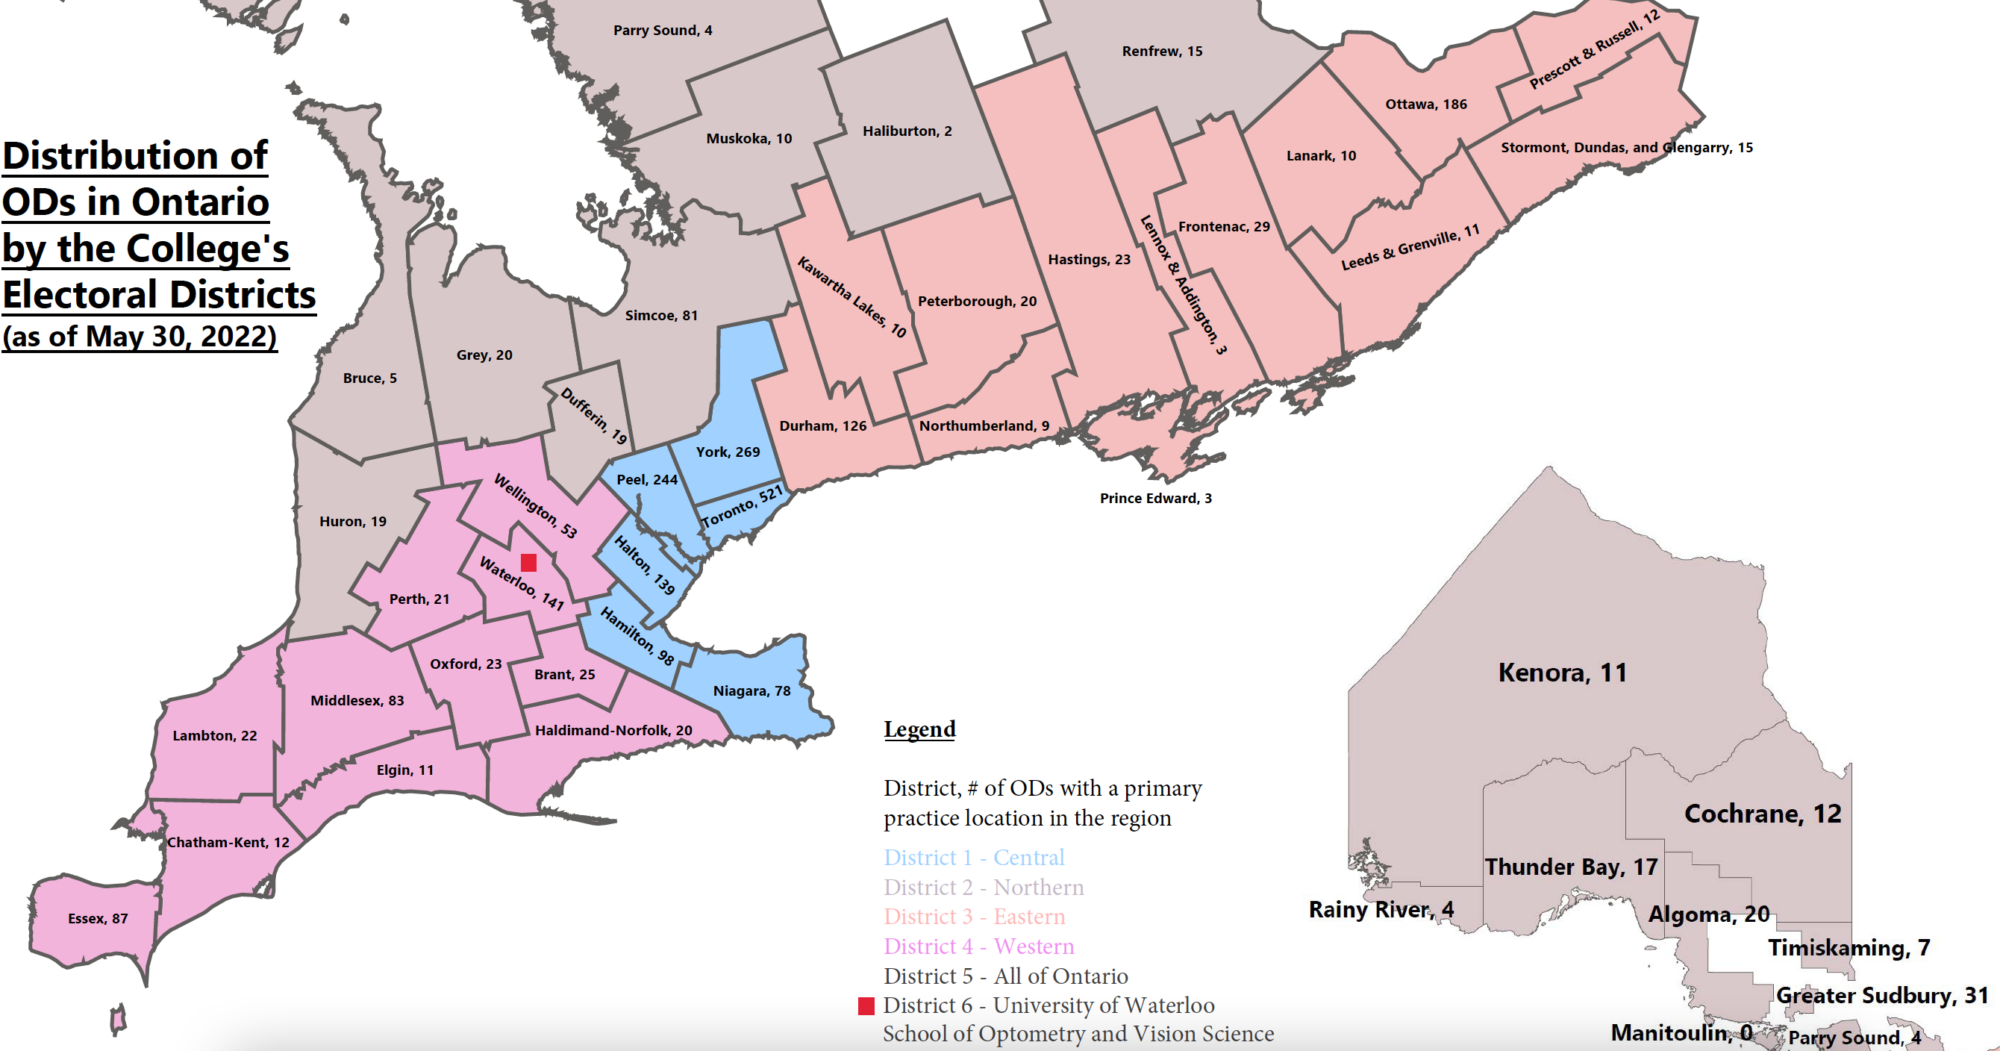 Distribution of ODs in Ontario by the College's Electoral Districts